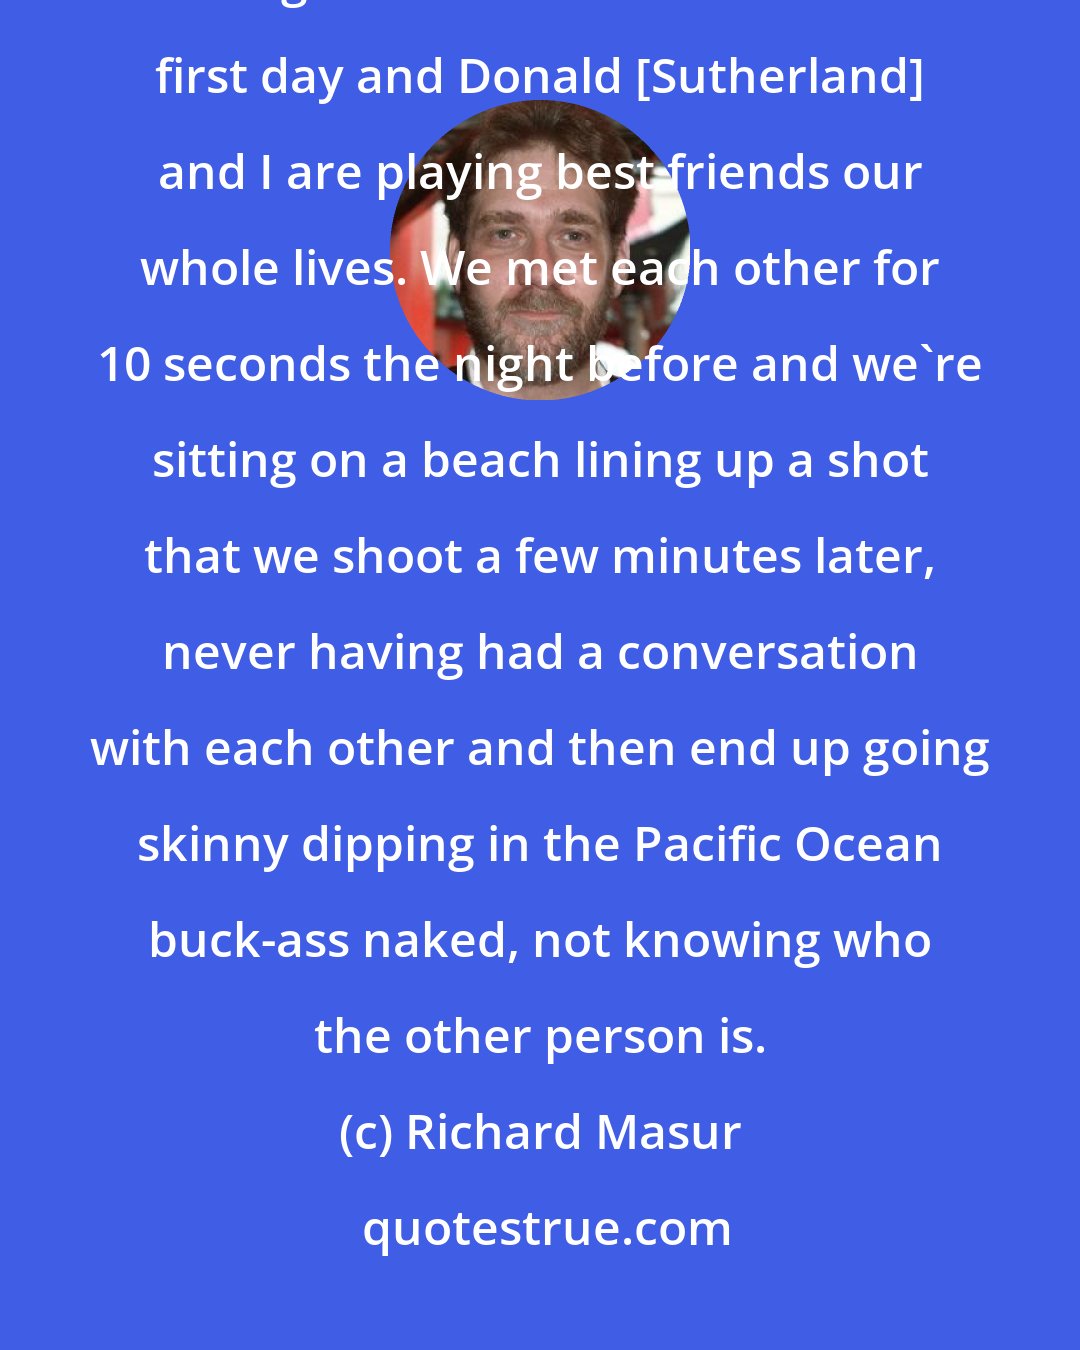 Richard Masur: People who just wanted to make it work and knew it was going to be a real challenge. We were on the beach the first day and Donald [Sutherland] and I are playing best friends our whole lives. We met each other for 10 seconds the night before and we're sitting on a beach lining up a shot that we shoot a few minutes later, never having had a conversation with each other and then end up going skinny dipping in the Pacific Ocean buck-ass naked, not knowing who the other person is.